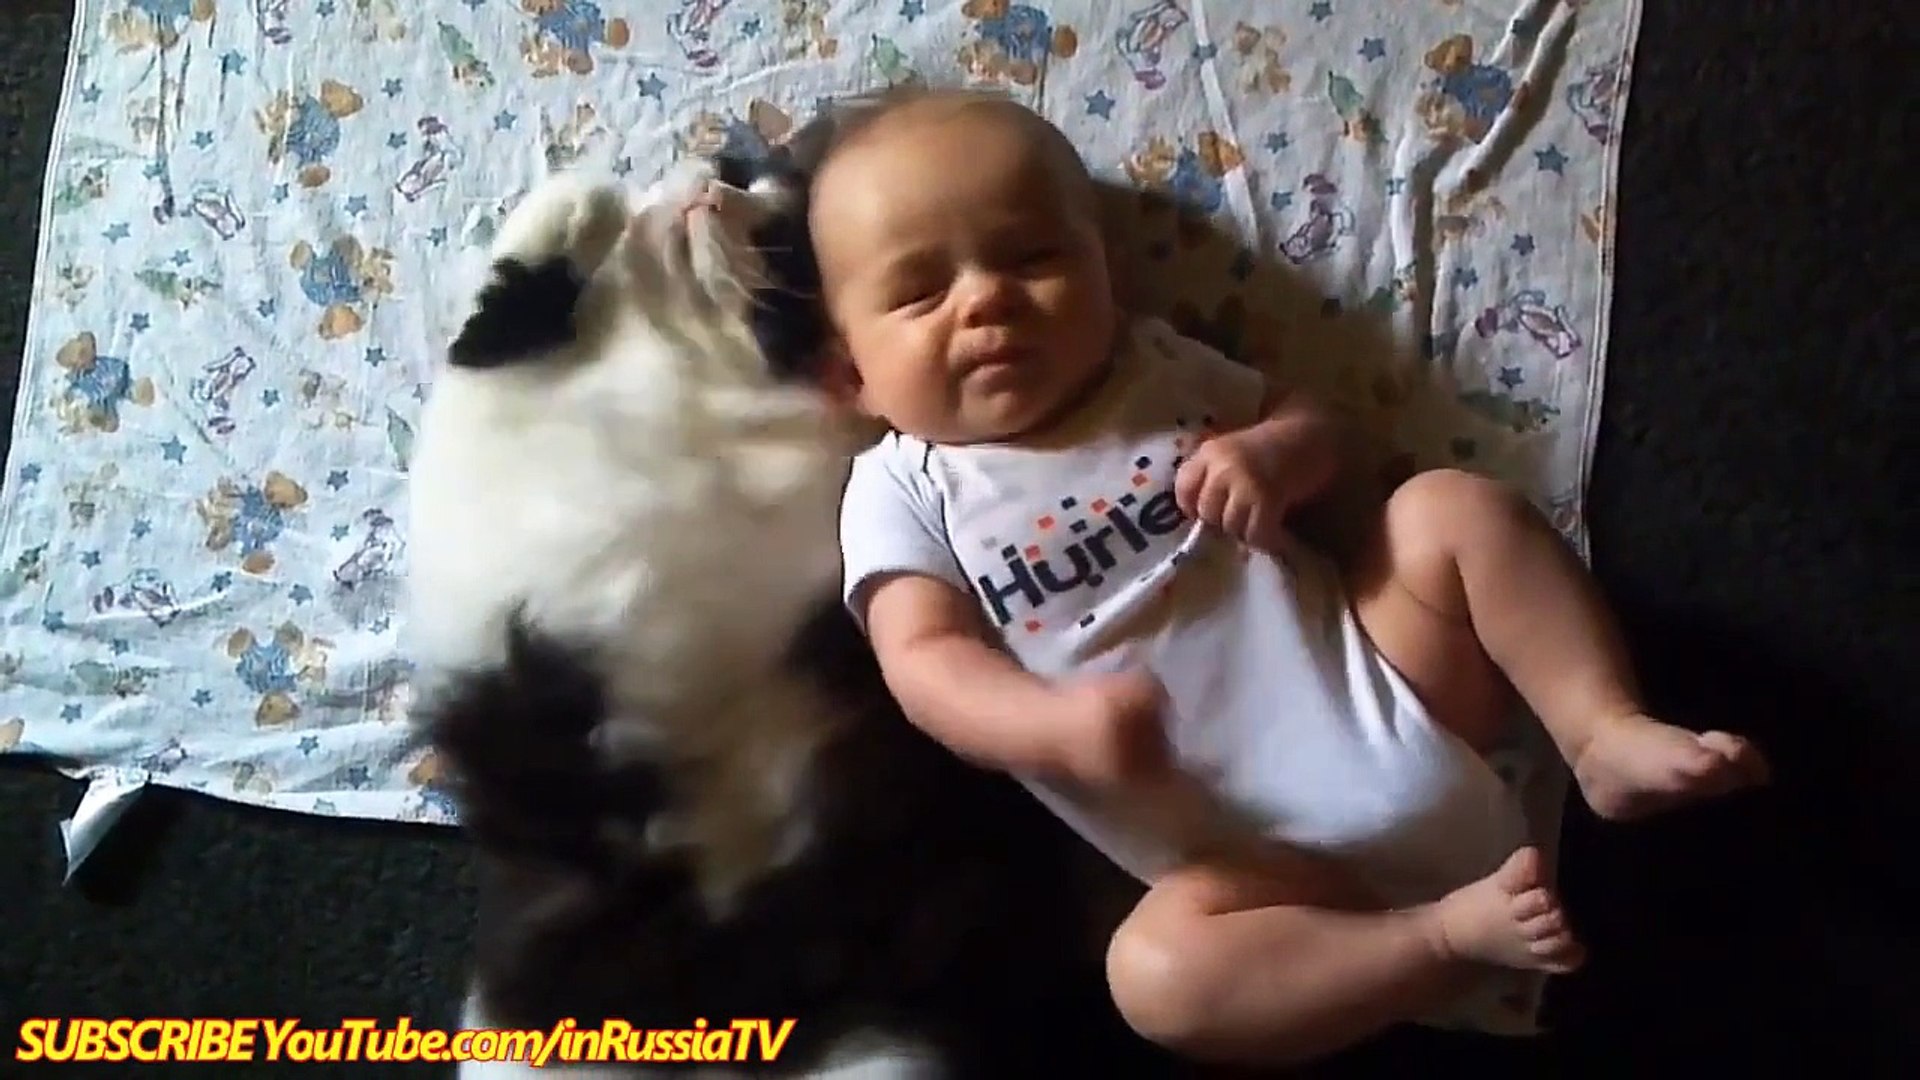 FUNNY VIDEOS Funny Cats Funny Baby Funny Cat Videos Funny Animals Funny Babies Videos